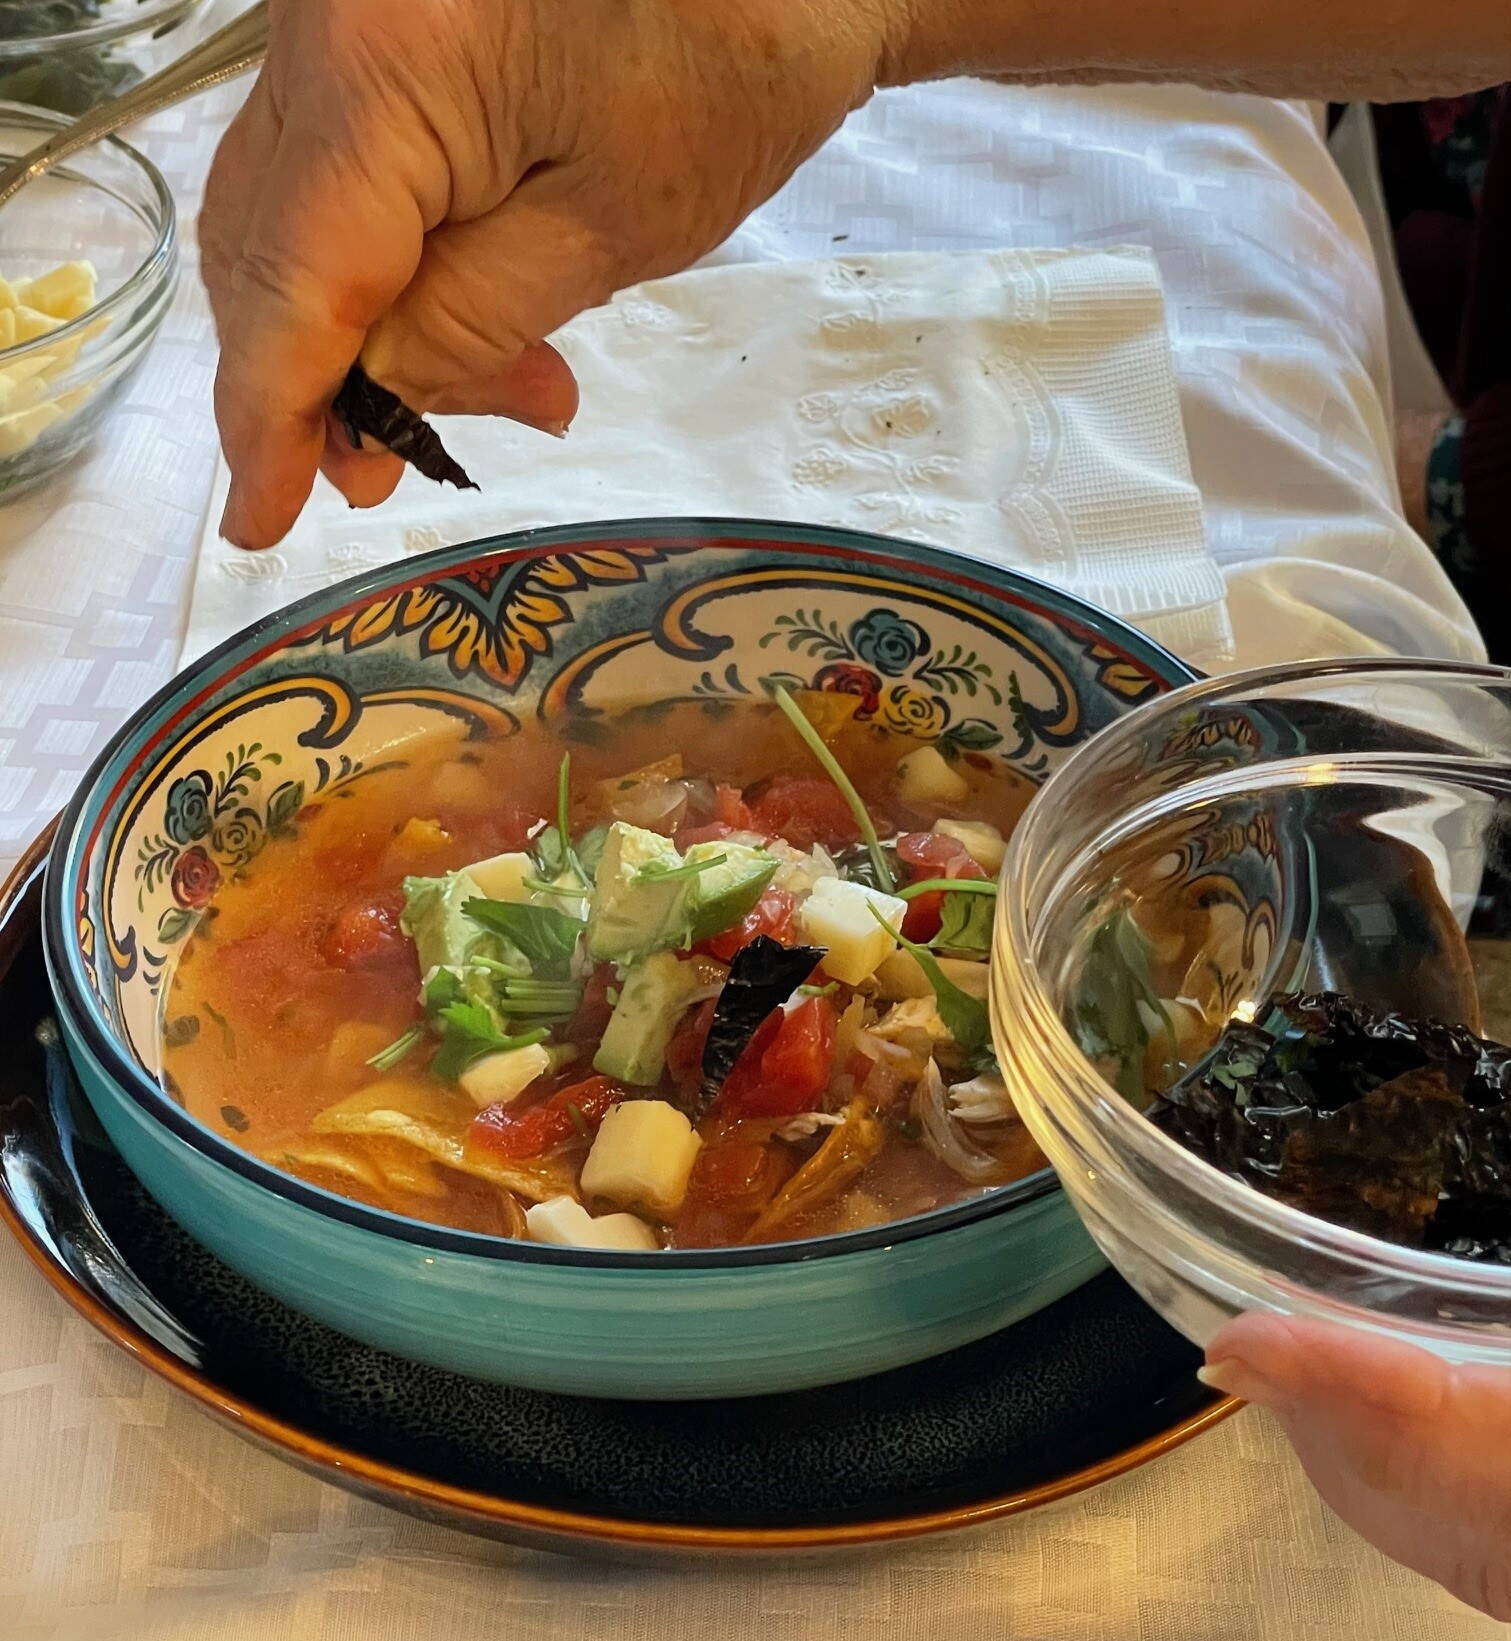 Garnishing a bowl of tortilla soup. (Photo by Laurie Craig)